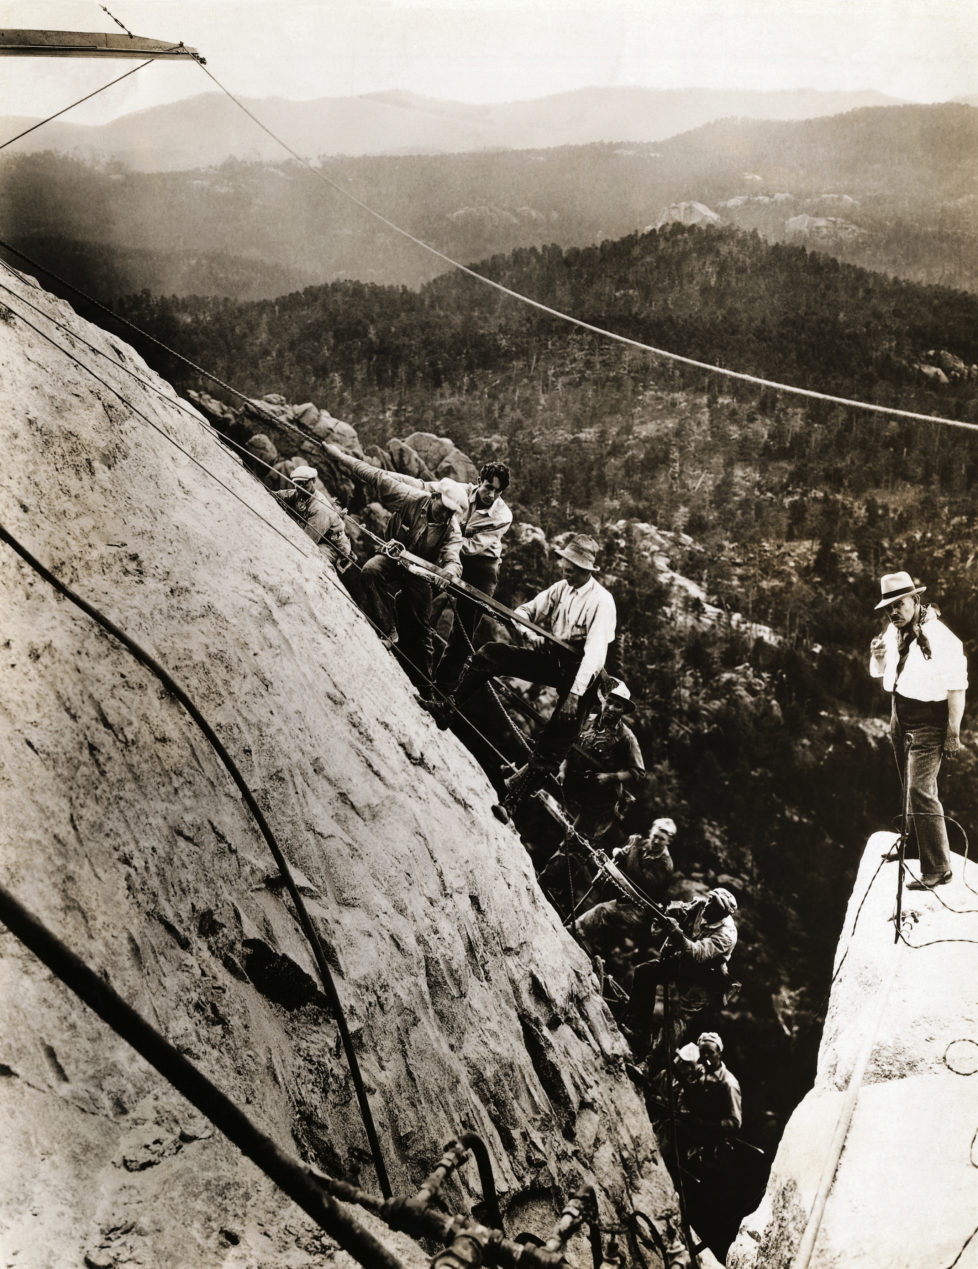 American sculptor Gutzon Borglum (r), who is leading the Mount Rushmore National Memorial project, stands on top of Mount Rushmore with a gang of his sculptors, finishing and smoothing the great granite cliff that will form part of the memorial. The sculptors are standing on the section which will become the forehead of George Washington. (Photo by George Rinhart/Corbis via Getty Images)